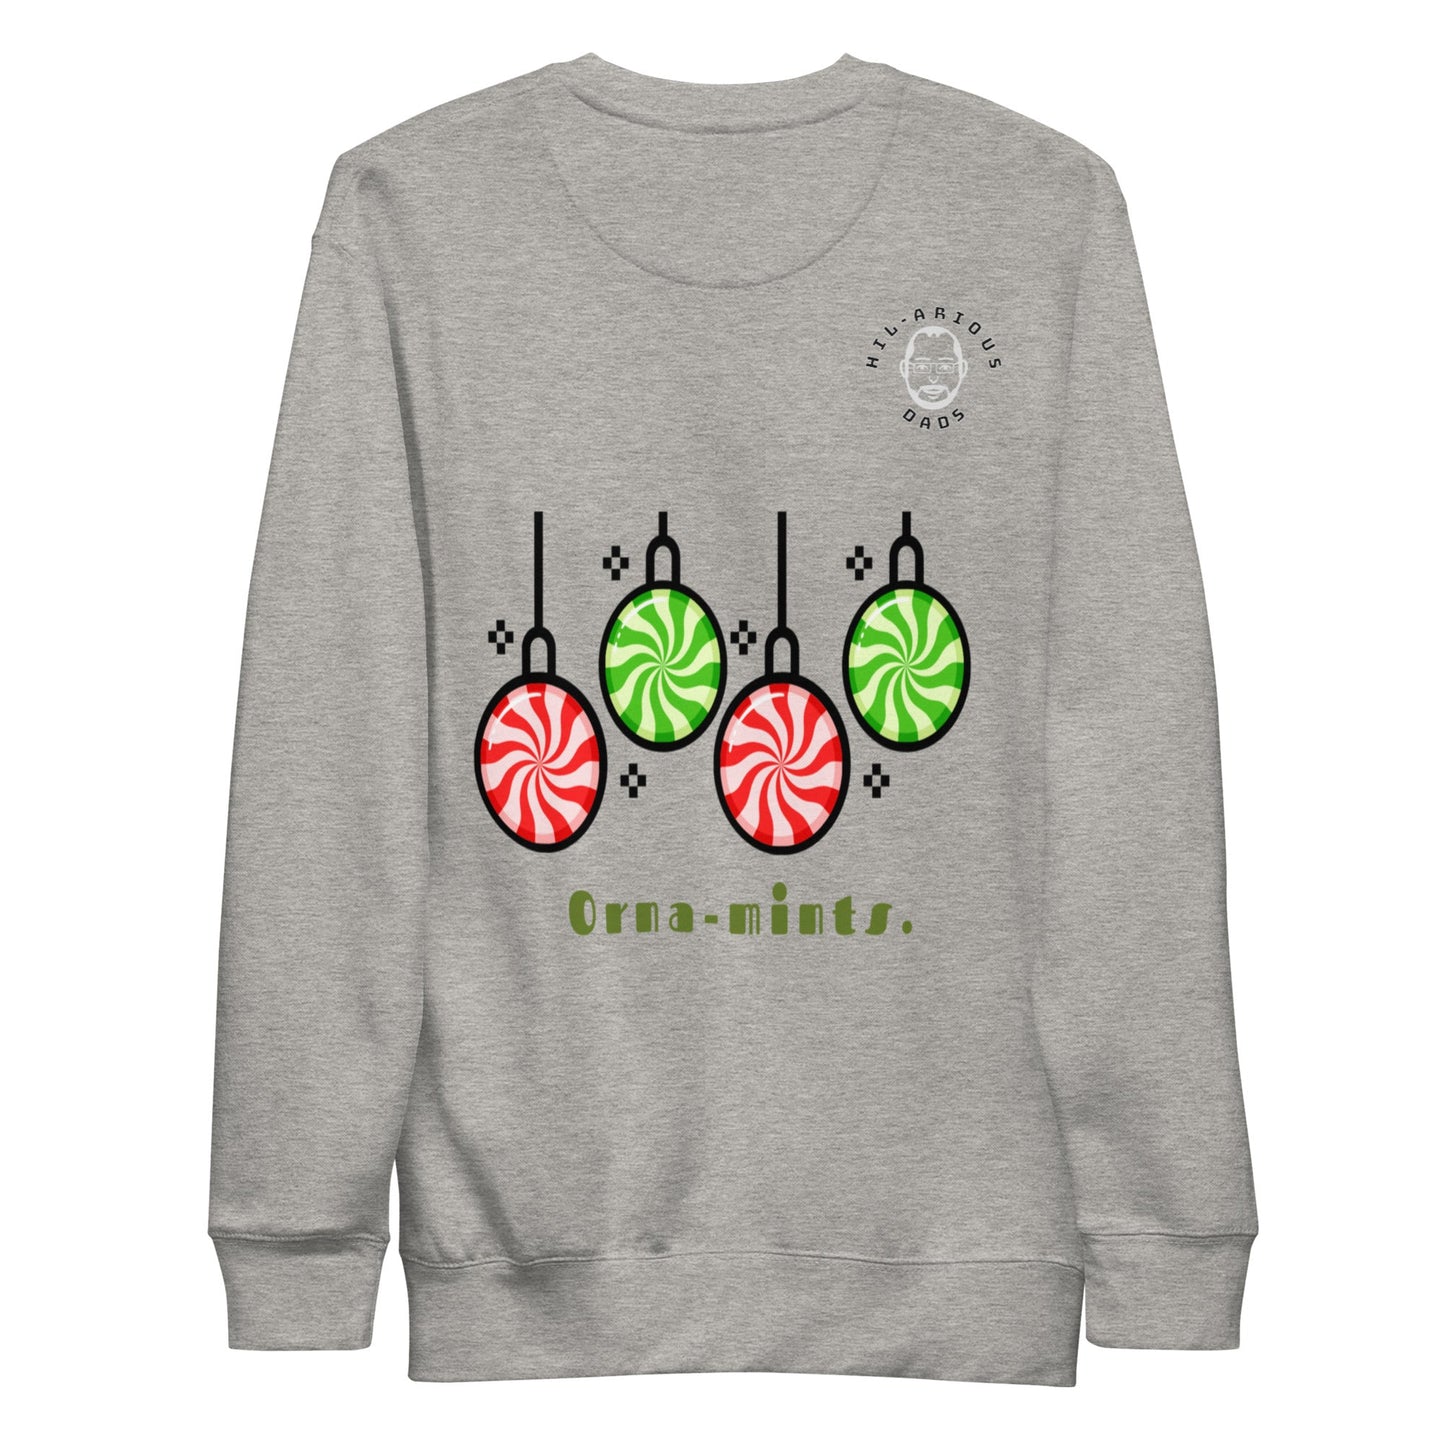 What’s a Christmas tree’s favorite candy?-Sweatshirt - Hil-arious Dads